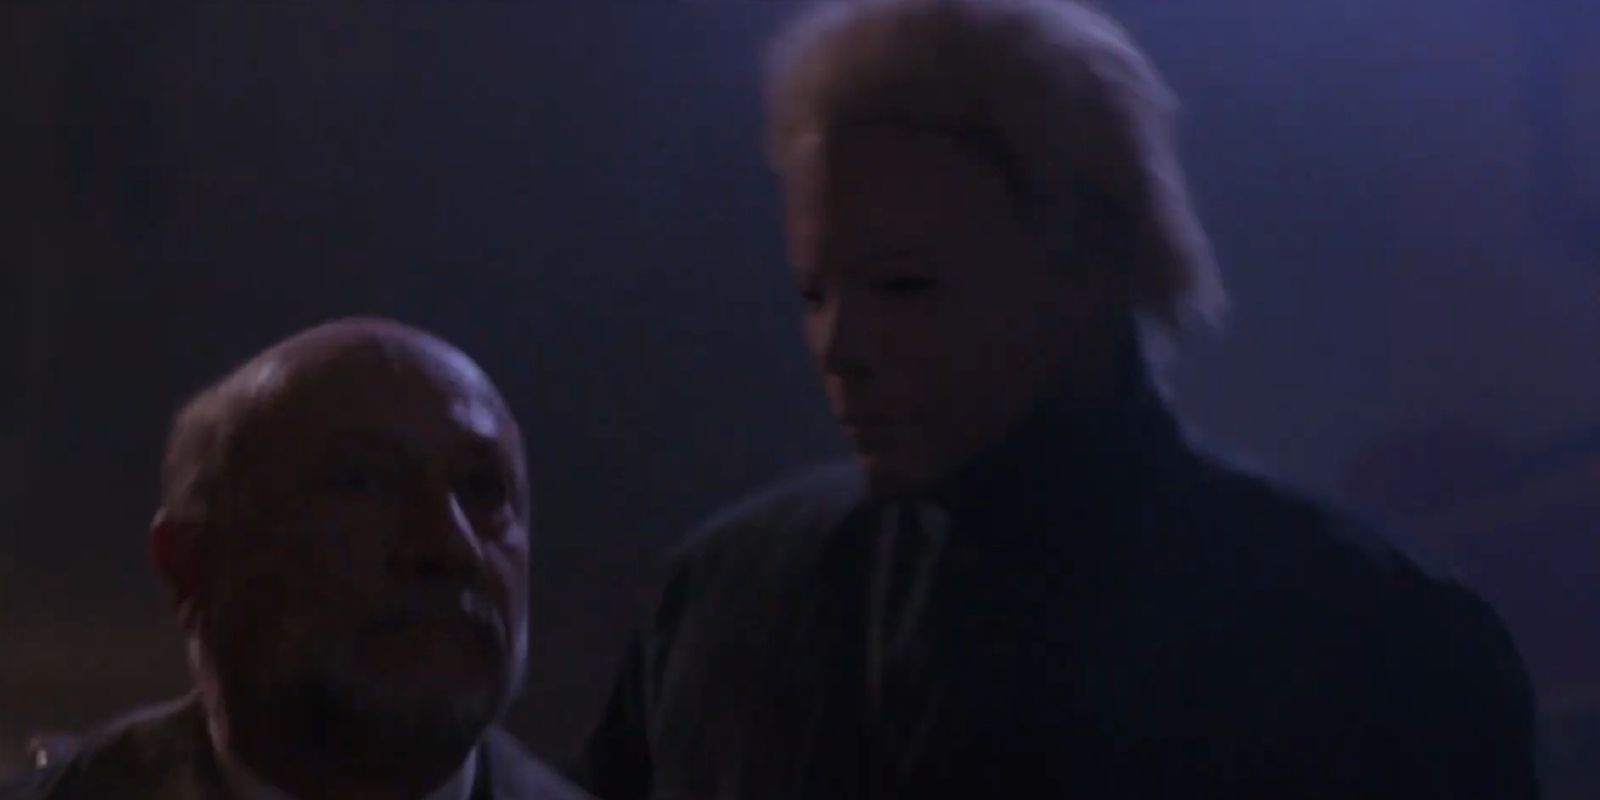 Michael Myers with the pink mask attacking Loomis in Halloween 4